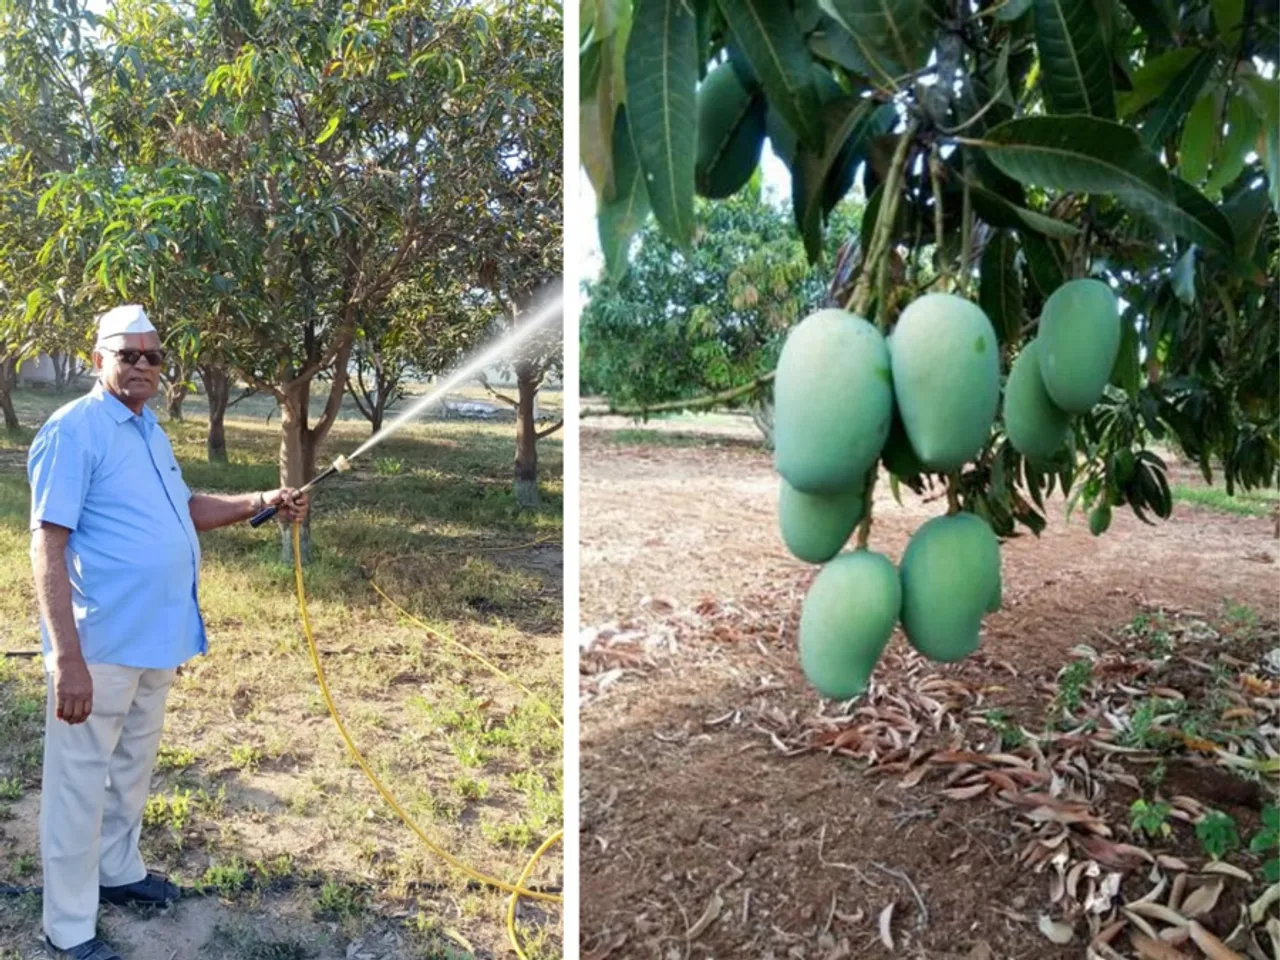 Gujarat: This school dropout farmer became a millionaire with organic farming of mango